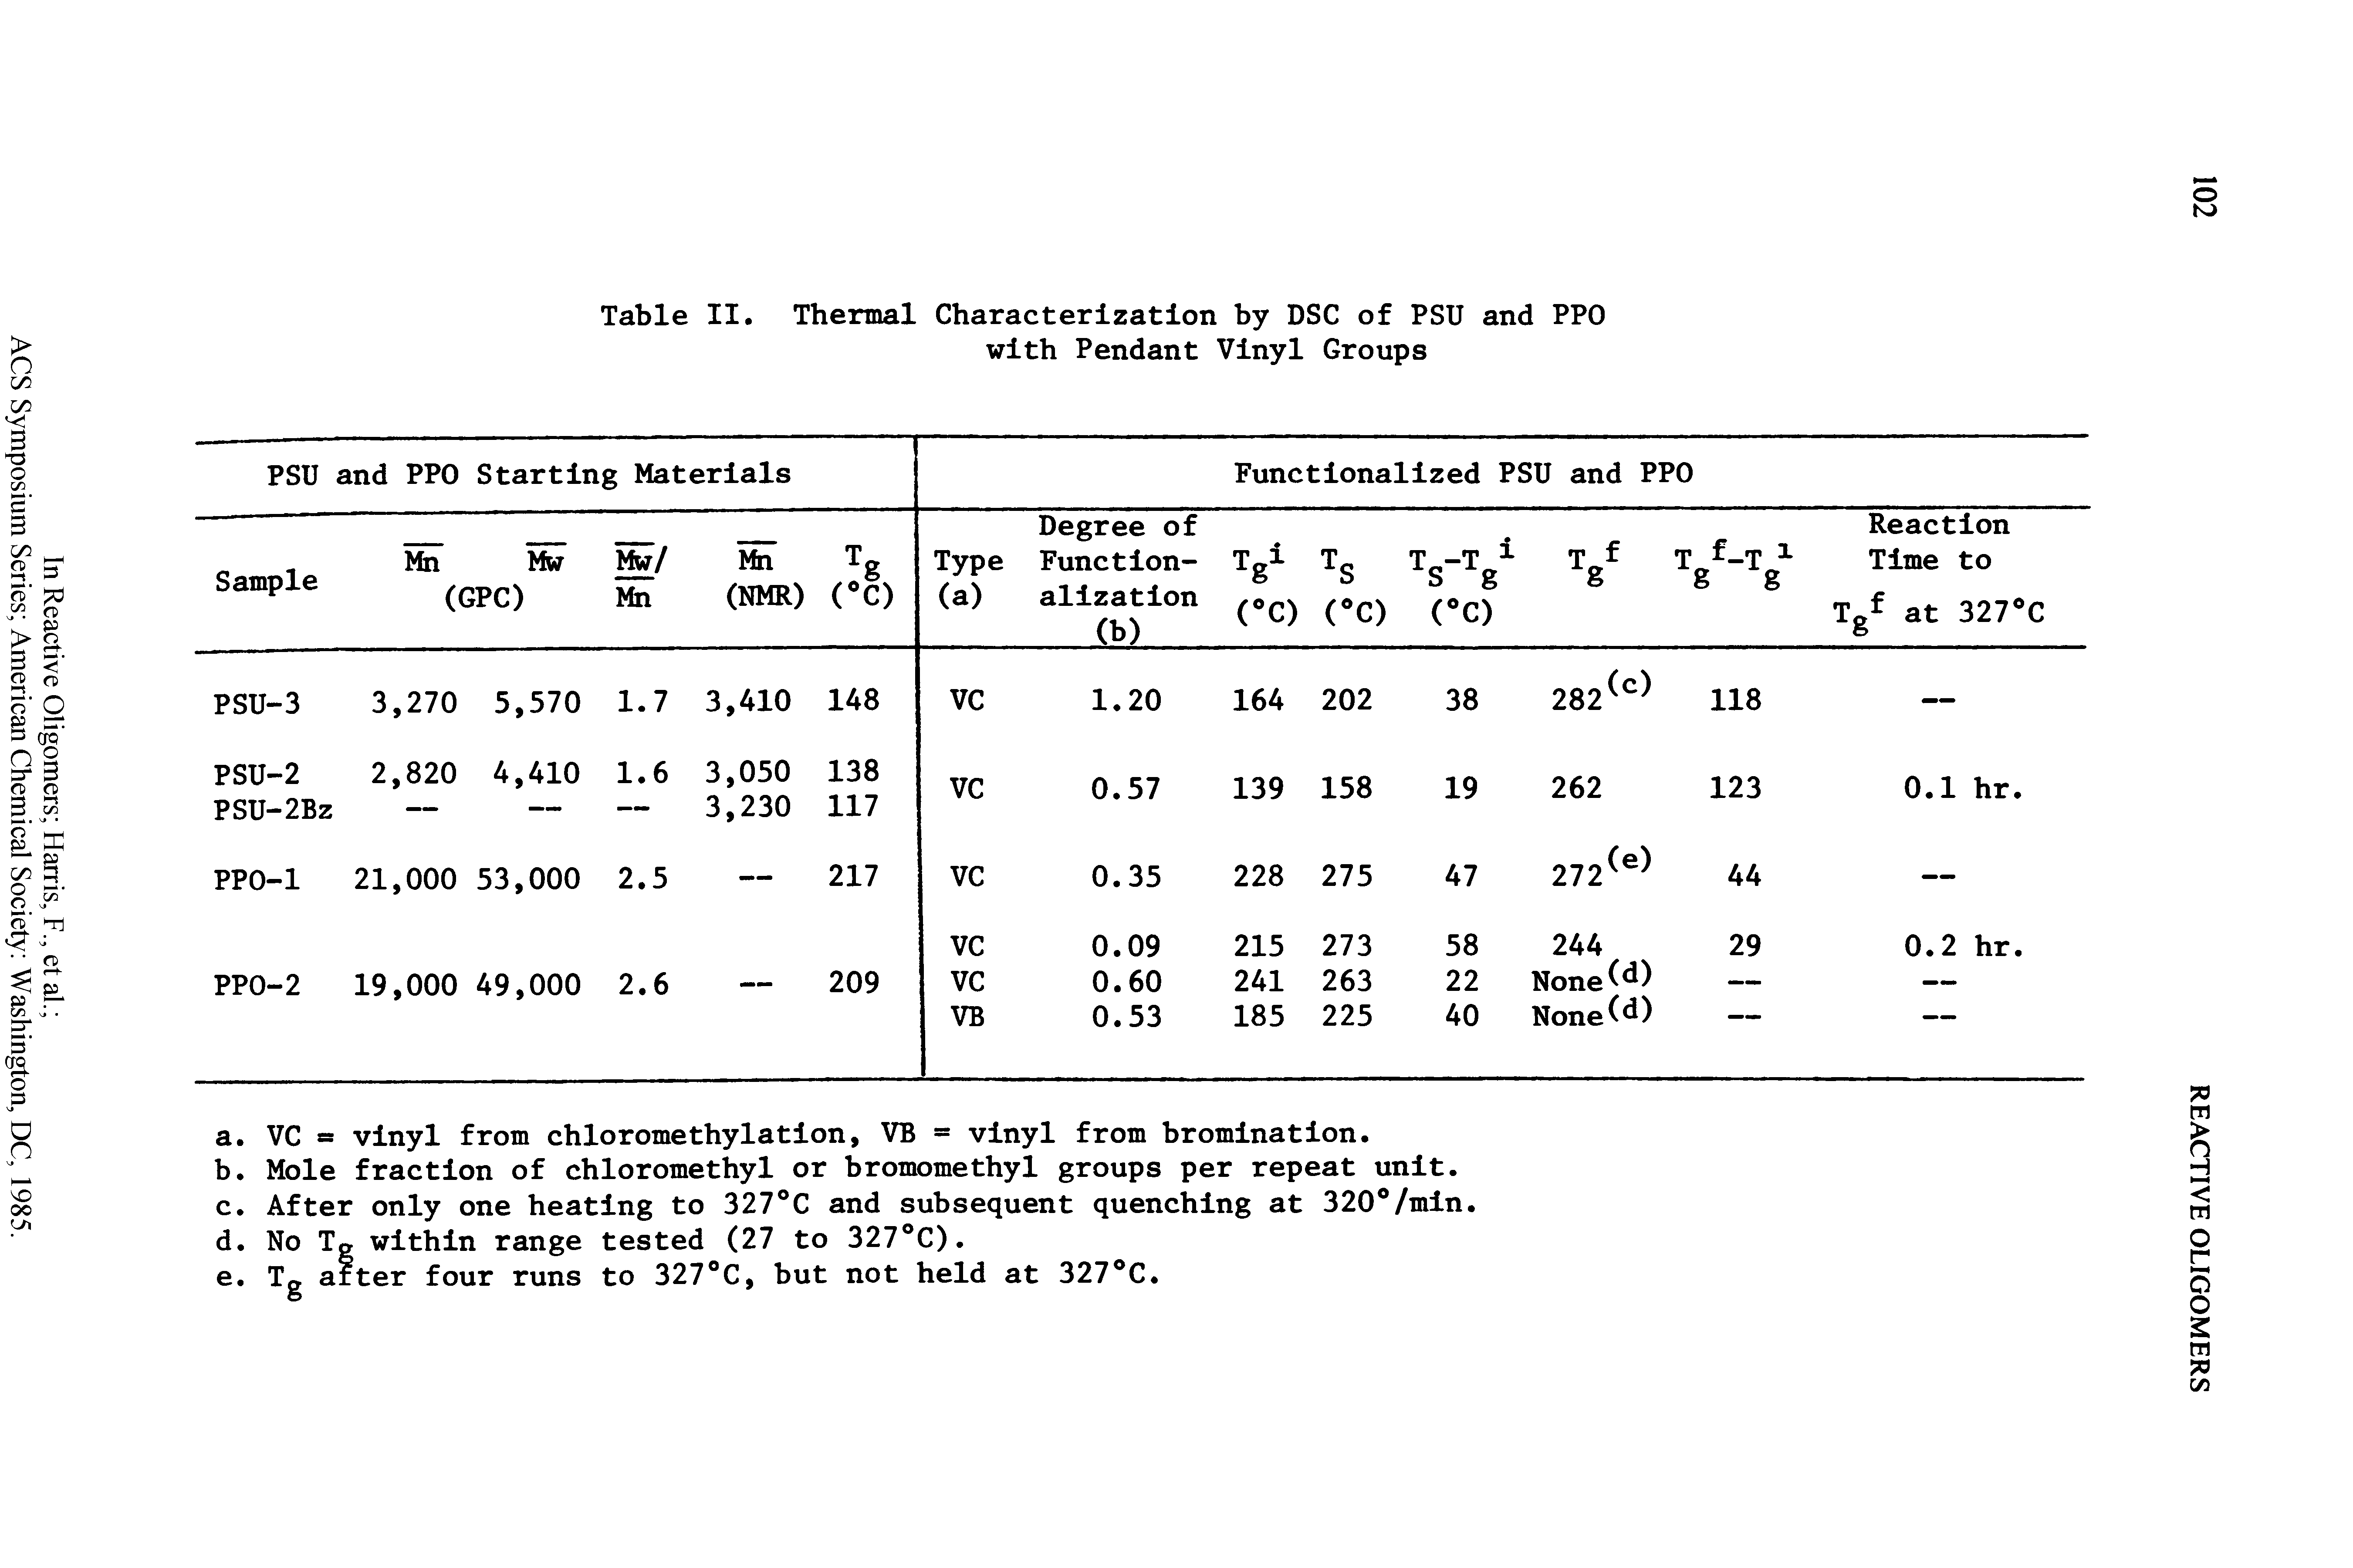 Table II. Thermal Characterization by DSC of PSU and PPO with Pendant Vinyl Groups...